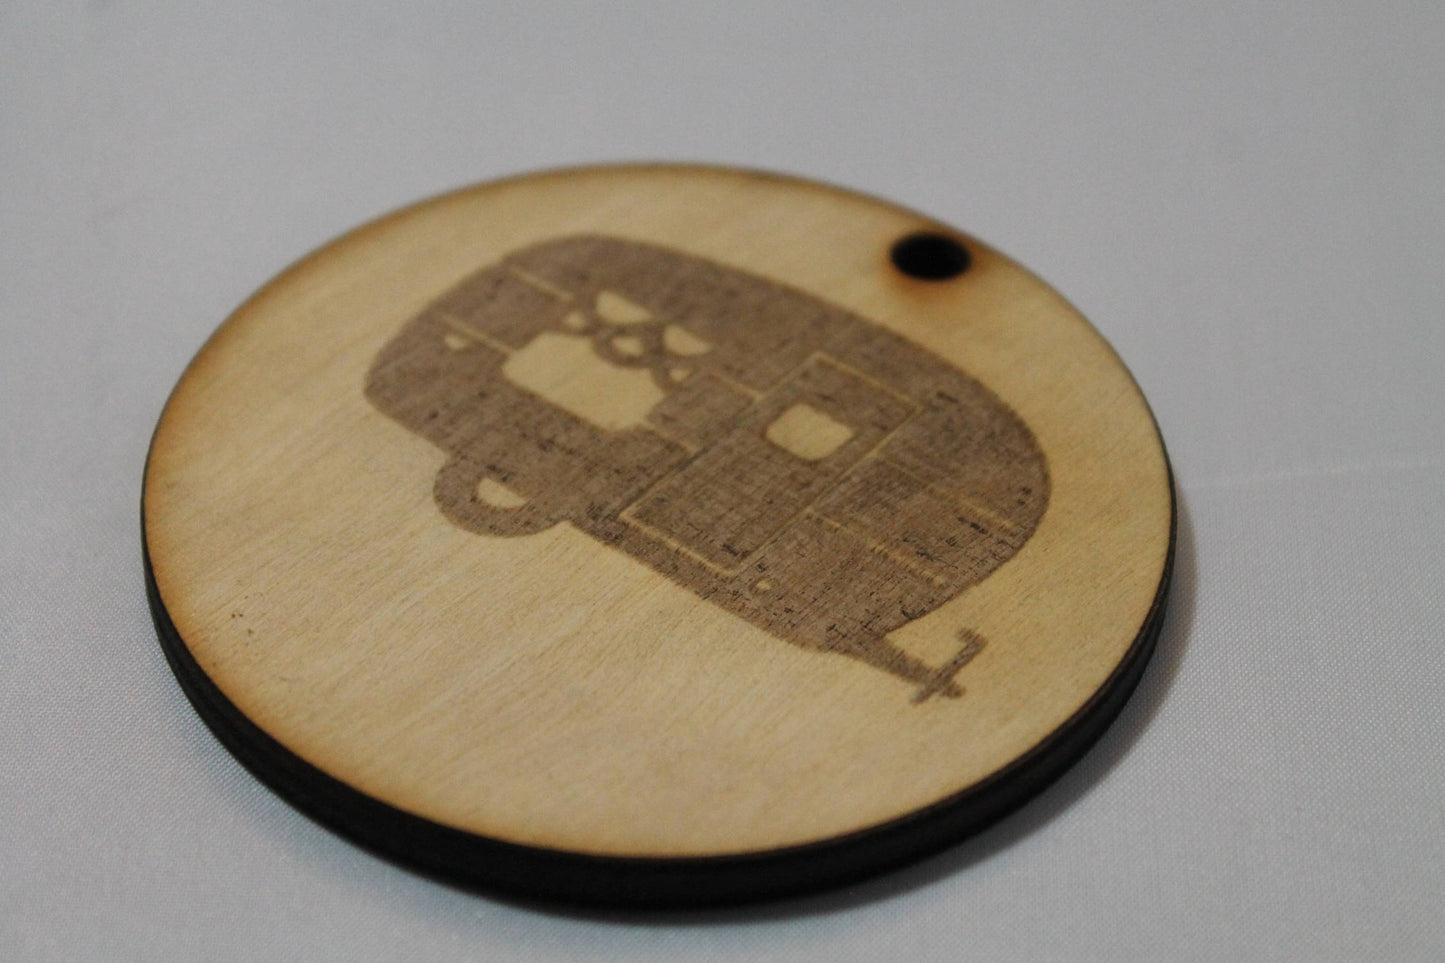 Camper, Cute Fat Camper, Camping, Customize, Christmas Ornament, Laser Engraved, Wood Cut Out, Footstepsinthepast